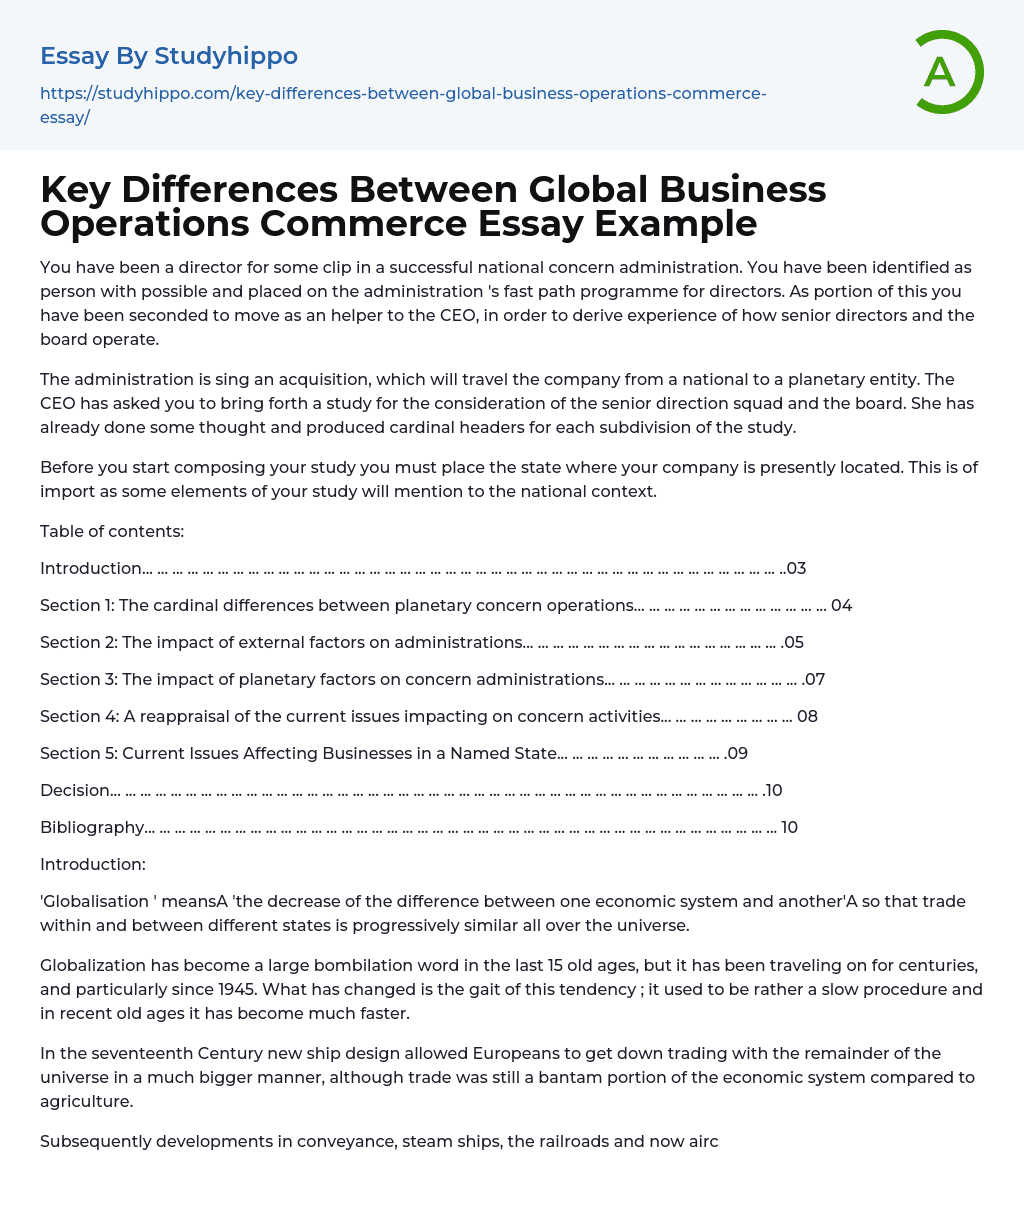 Key Differences Between Global Business Operations Commerce Essay Example